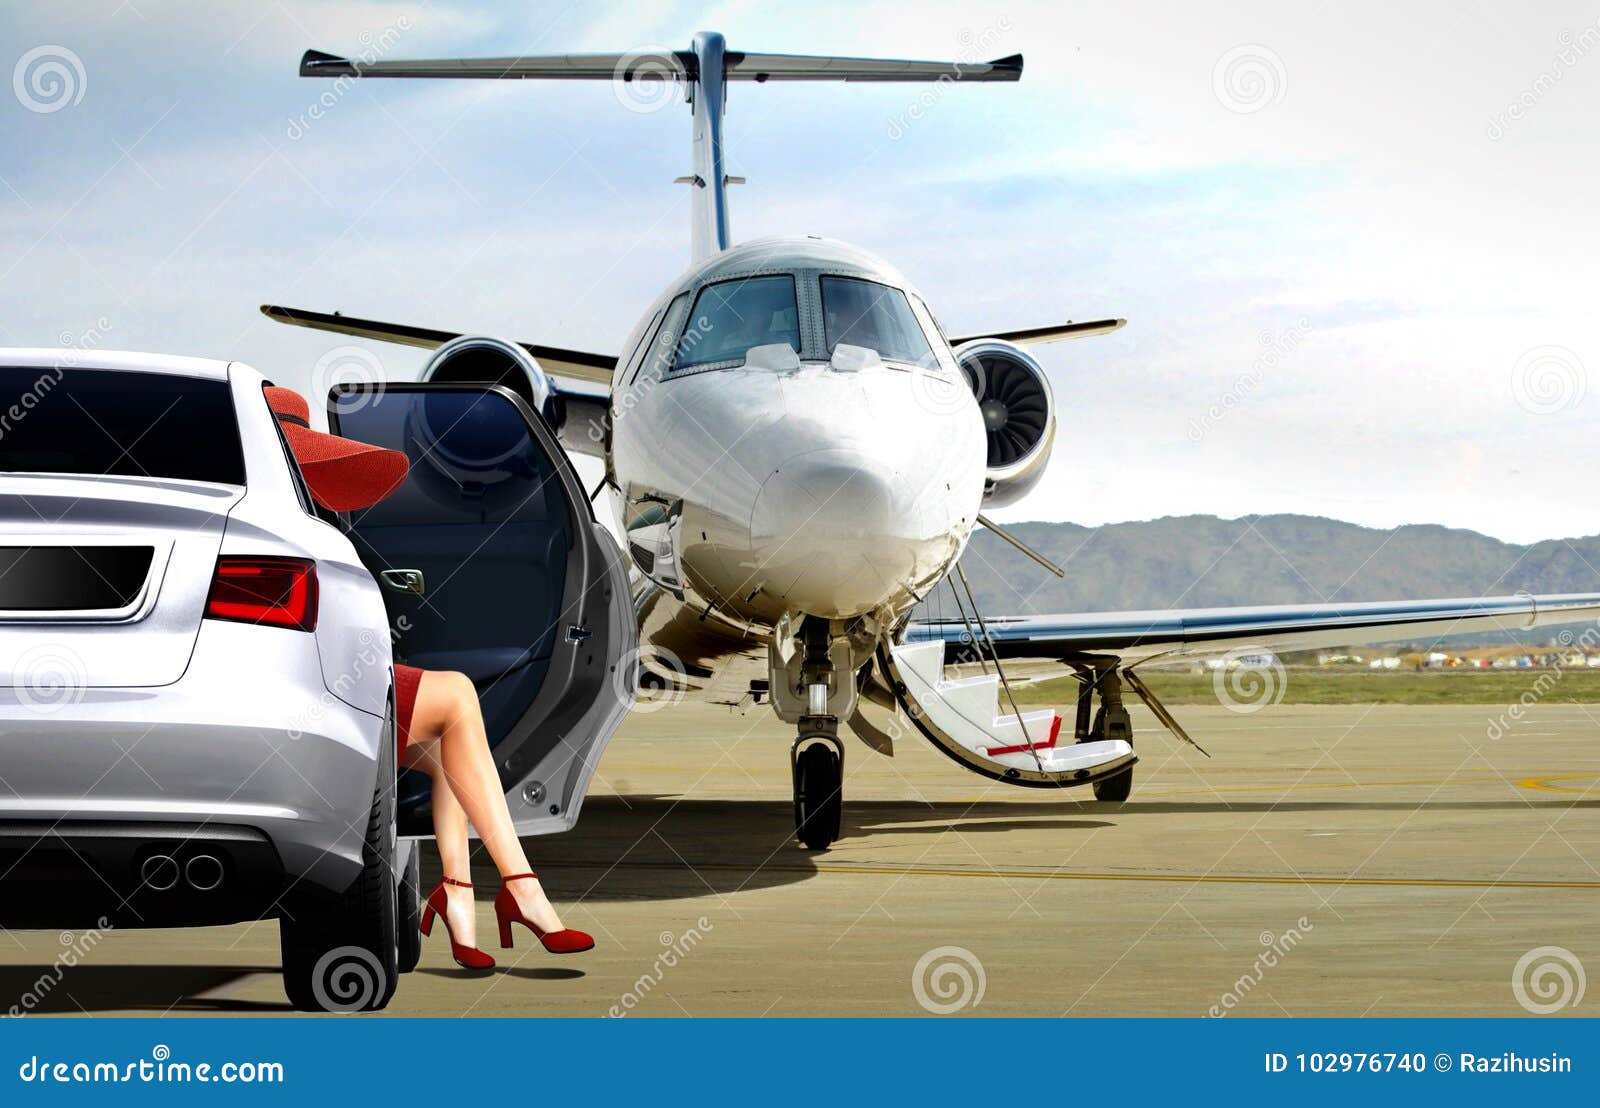 women getting ready to boarding a private jet